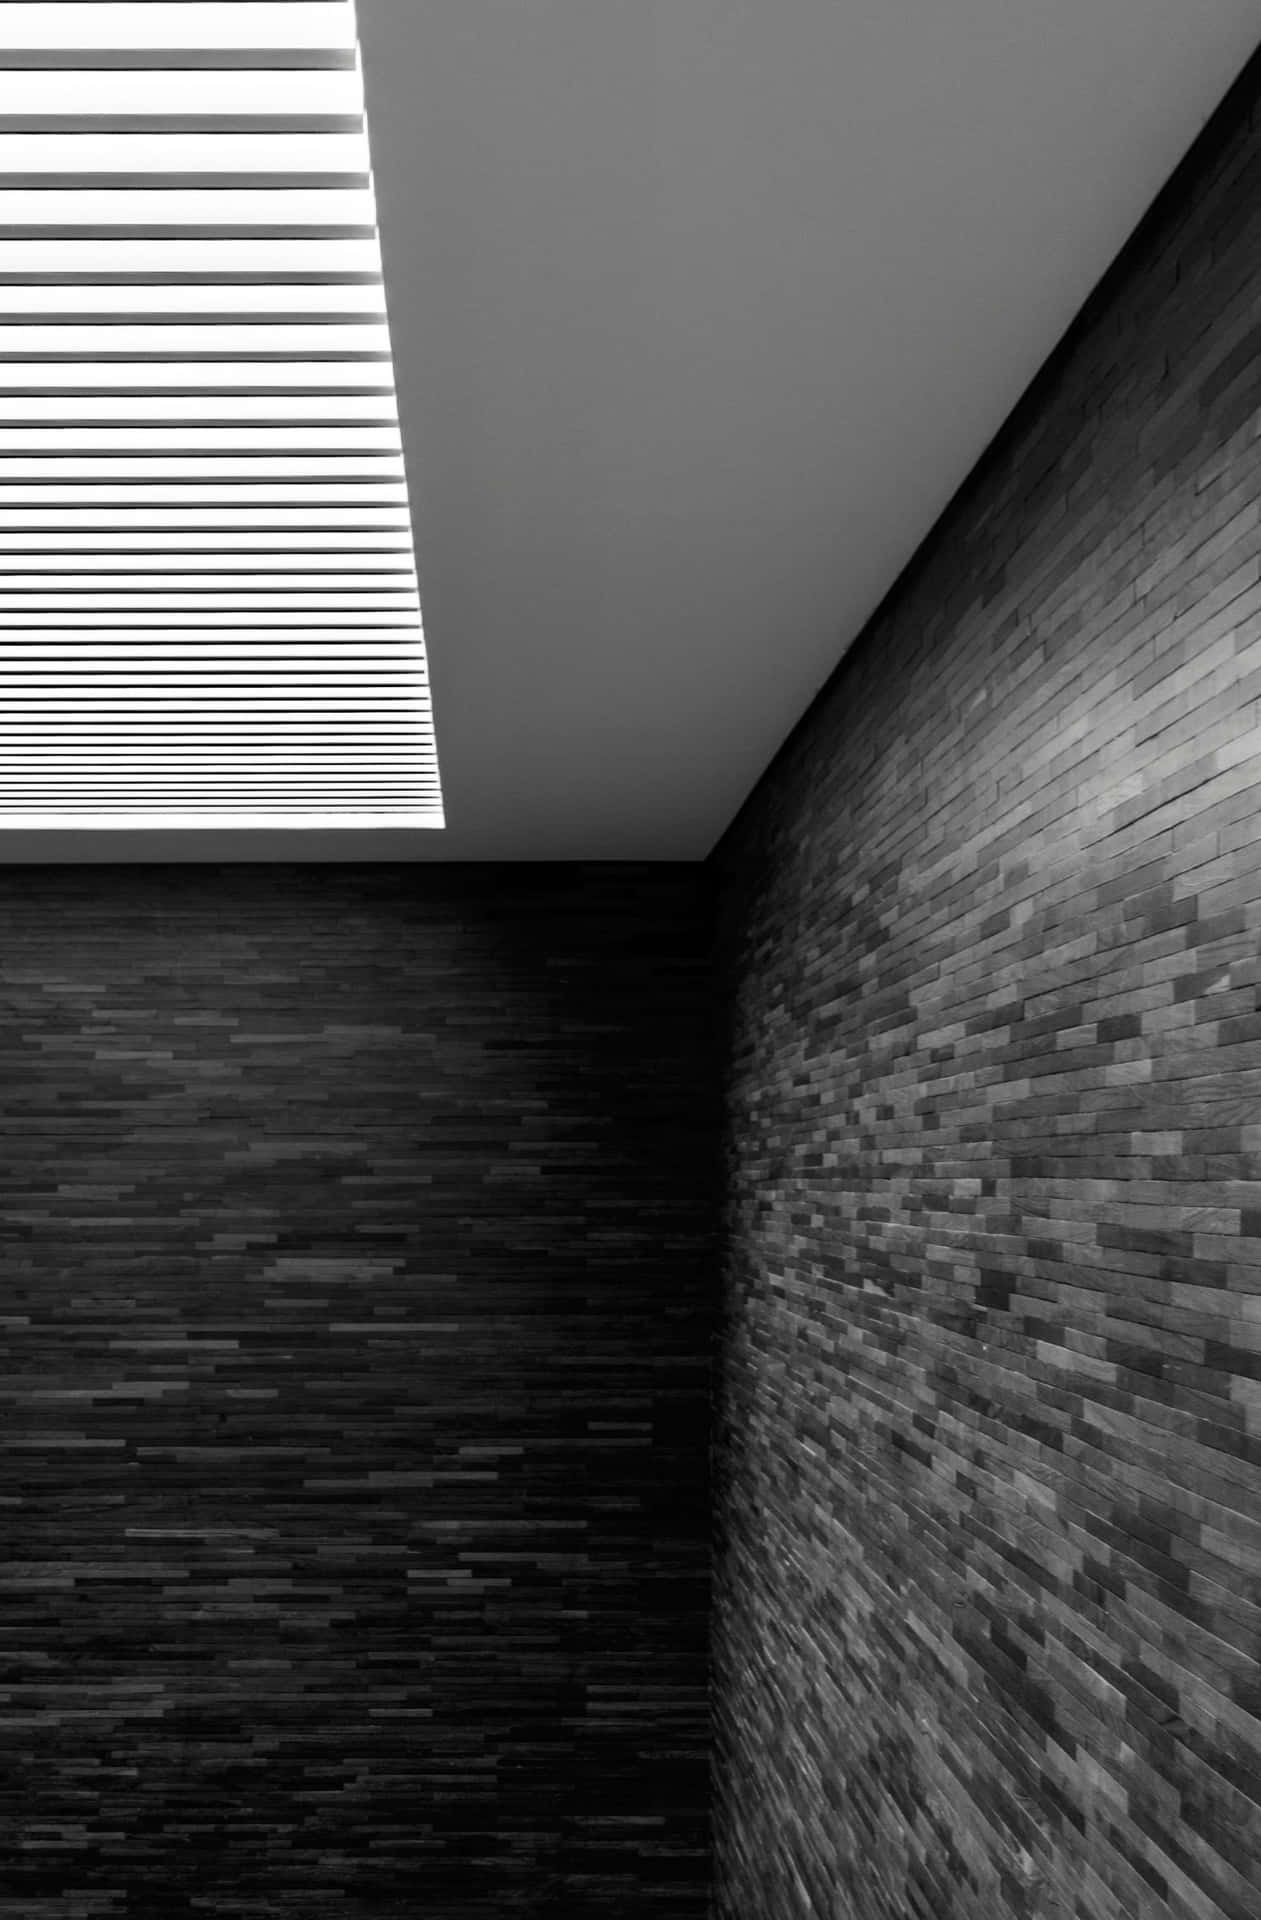 A Black And White Photo Of A Room With A Ceiling Wallpaper